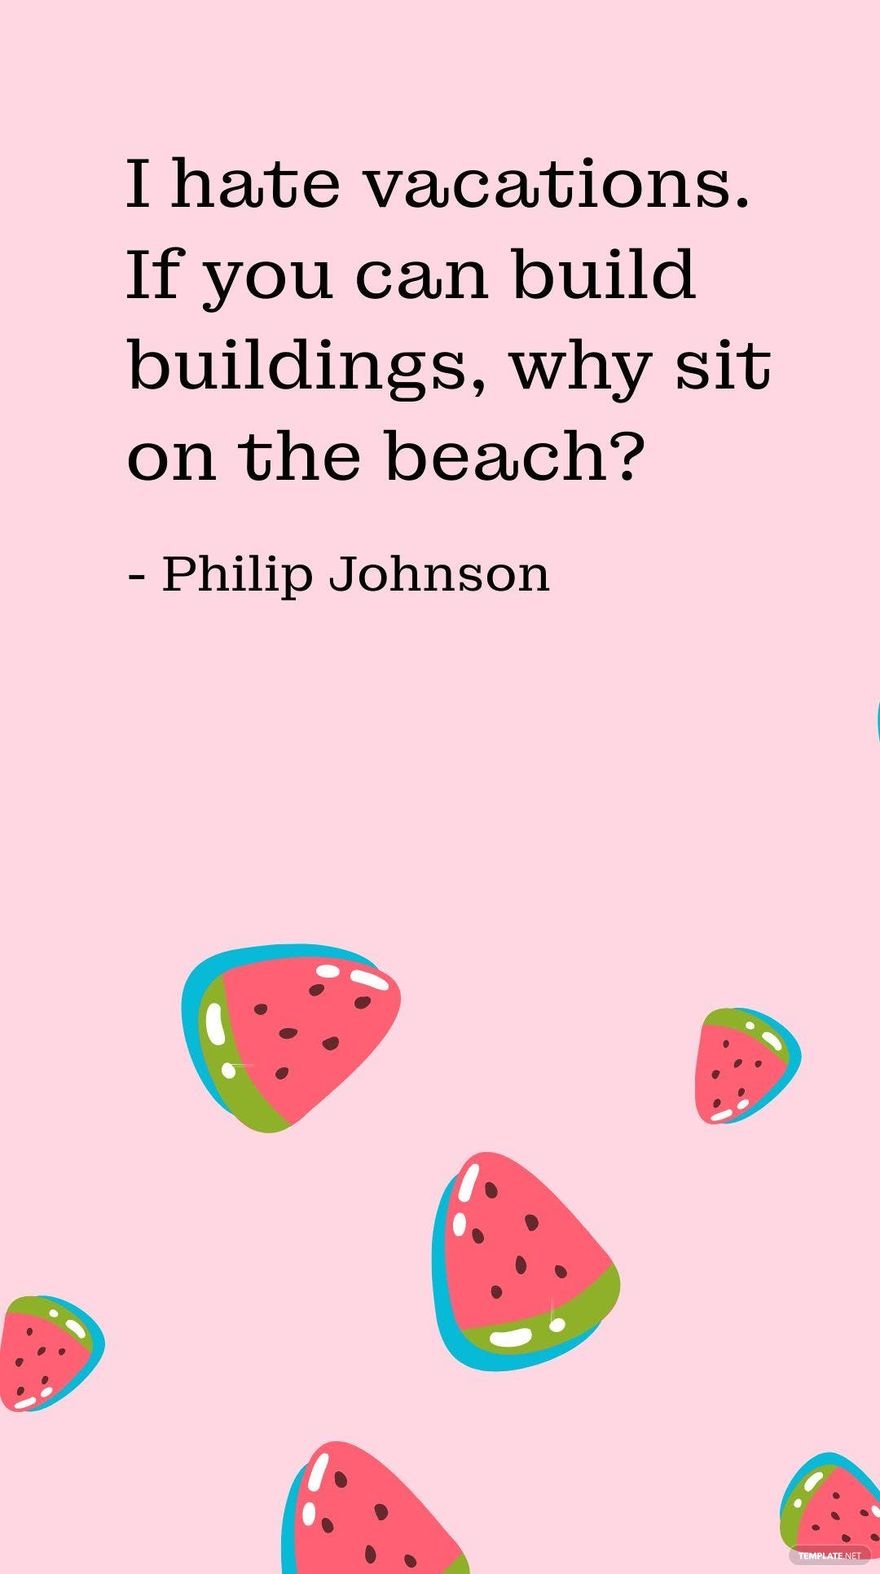 Philip Johnson - I hate vacations. If you can build buildings, why sit on the beach? in JPG